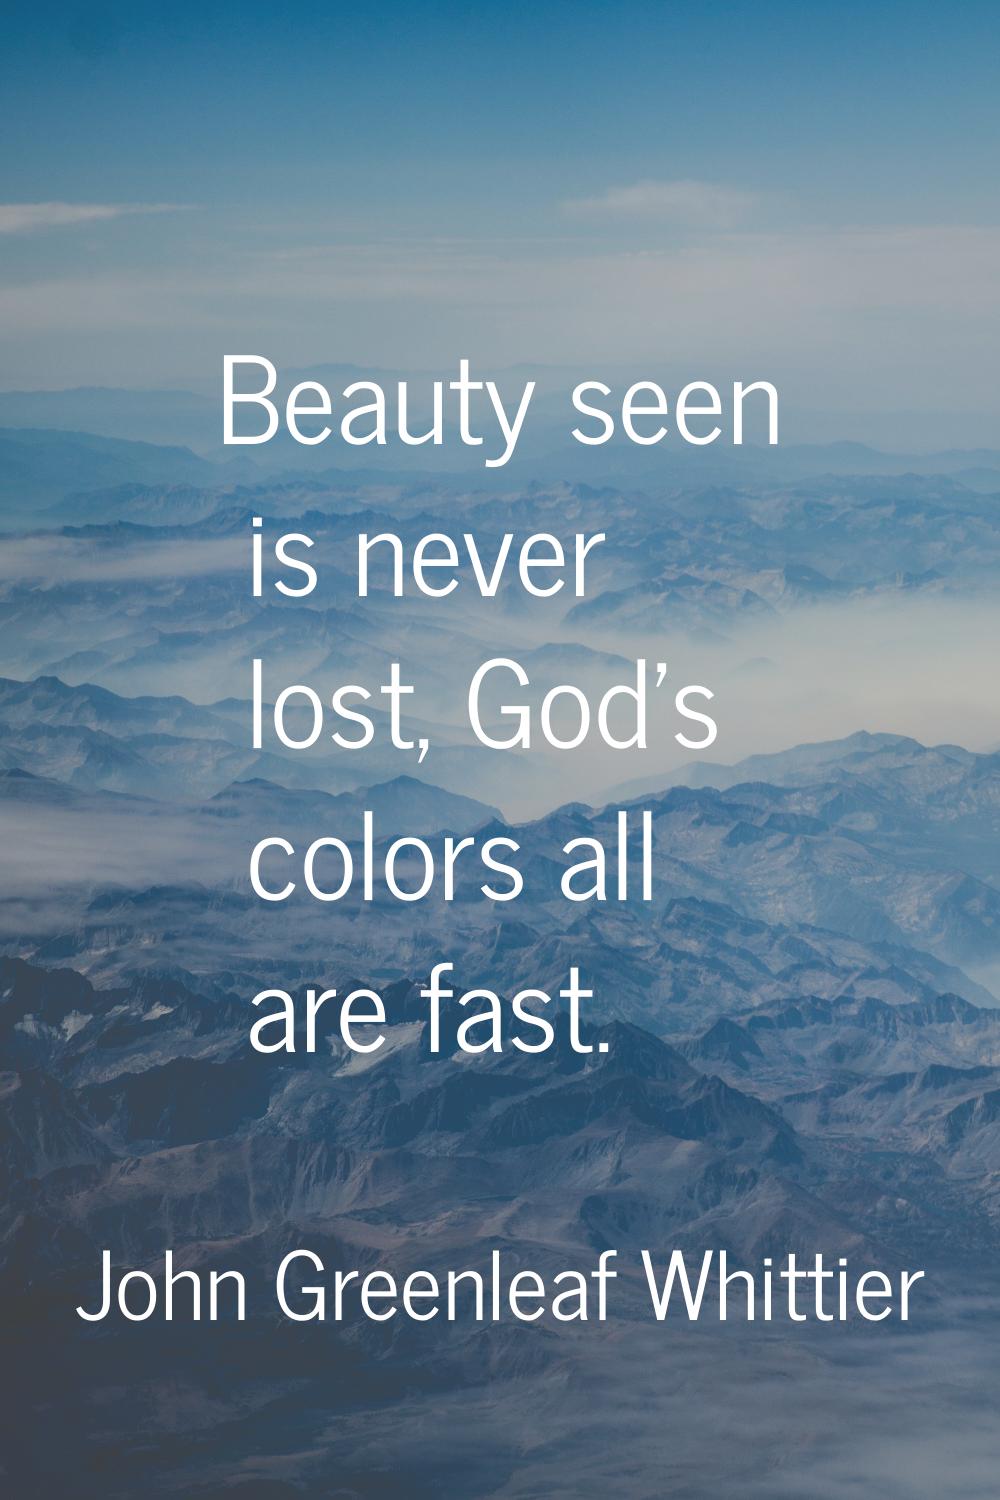 Beauty seen is never lost, God's colors all are fast.